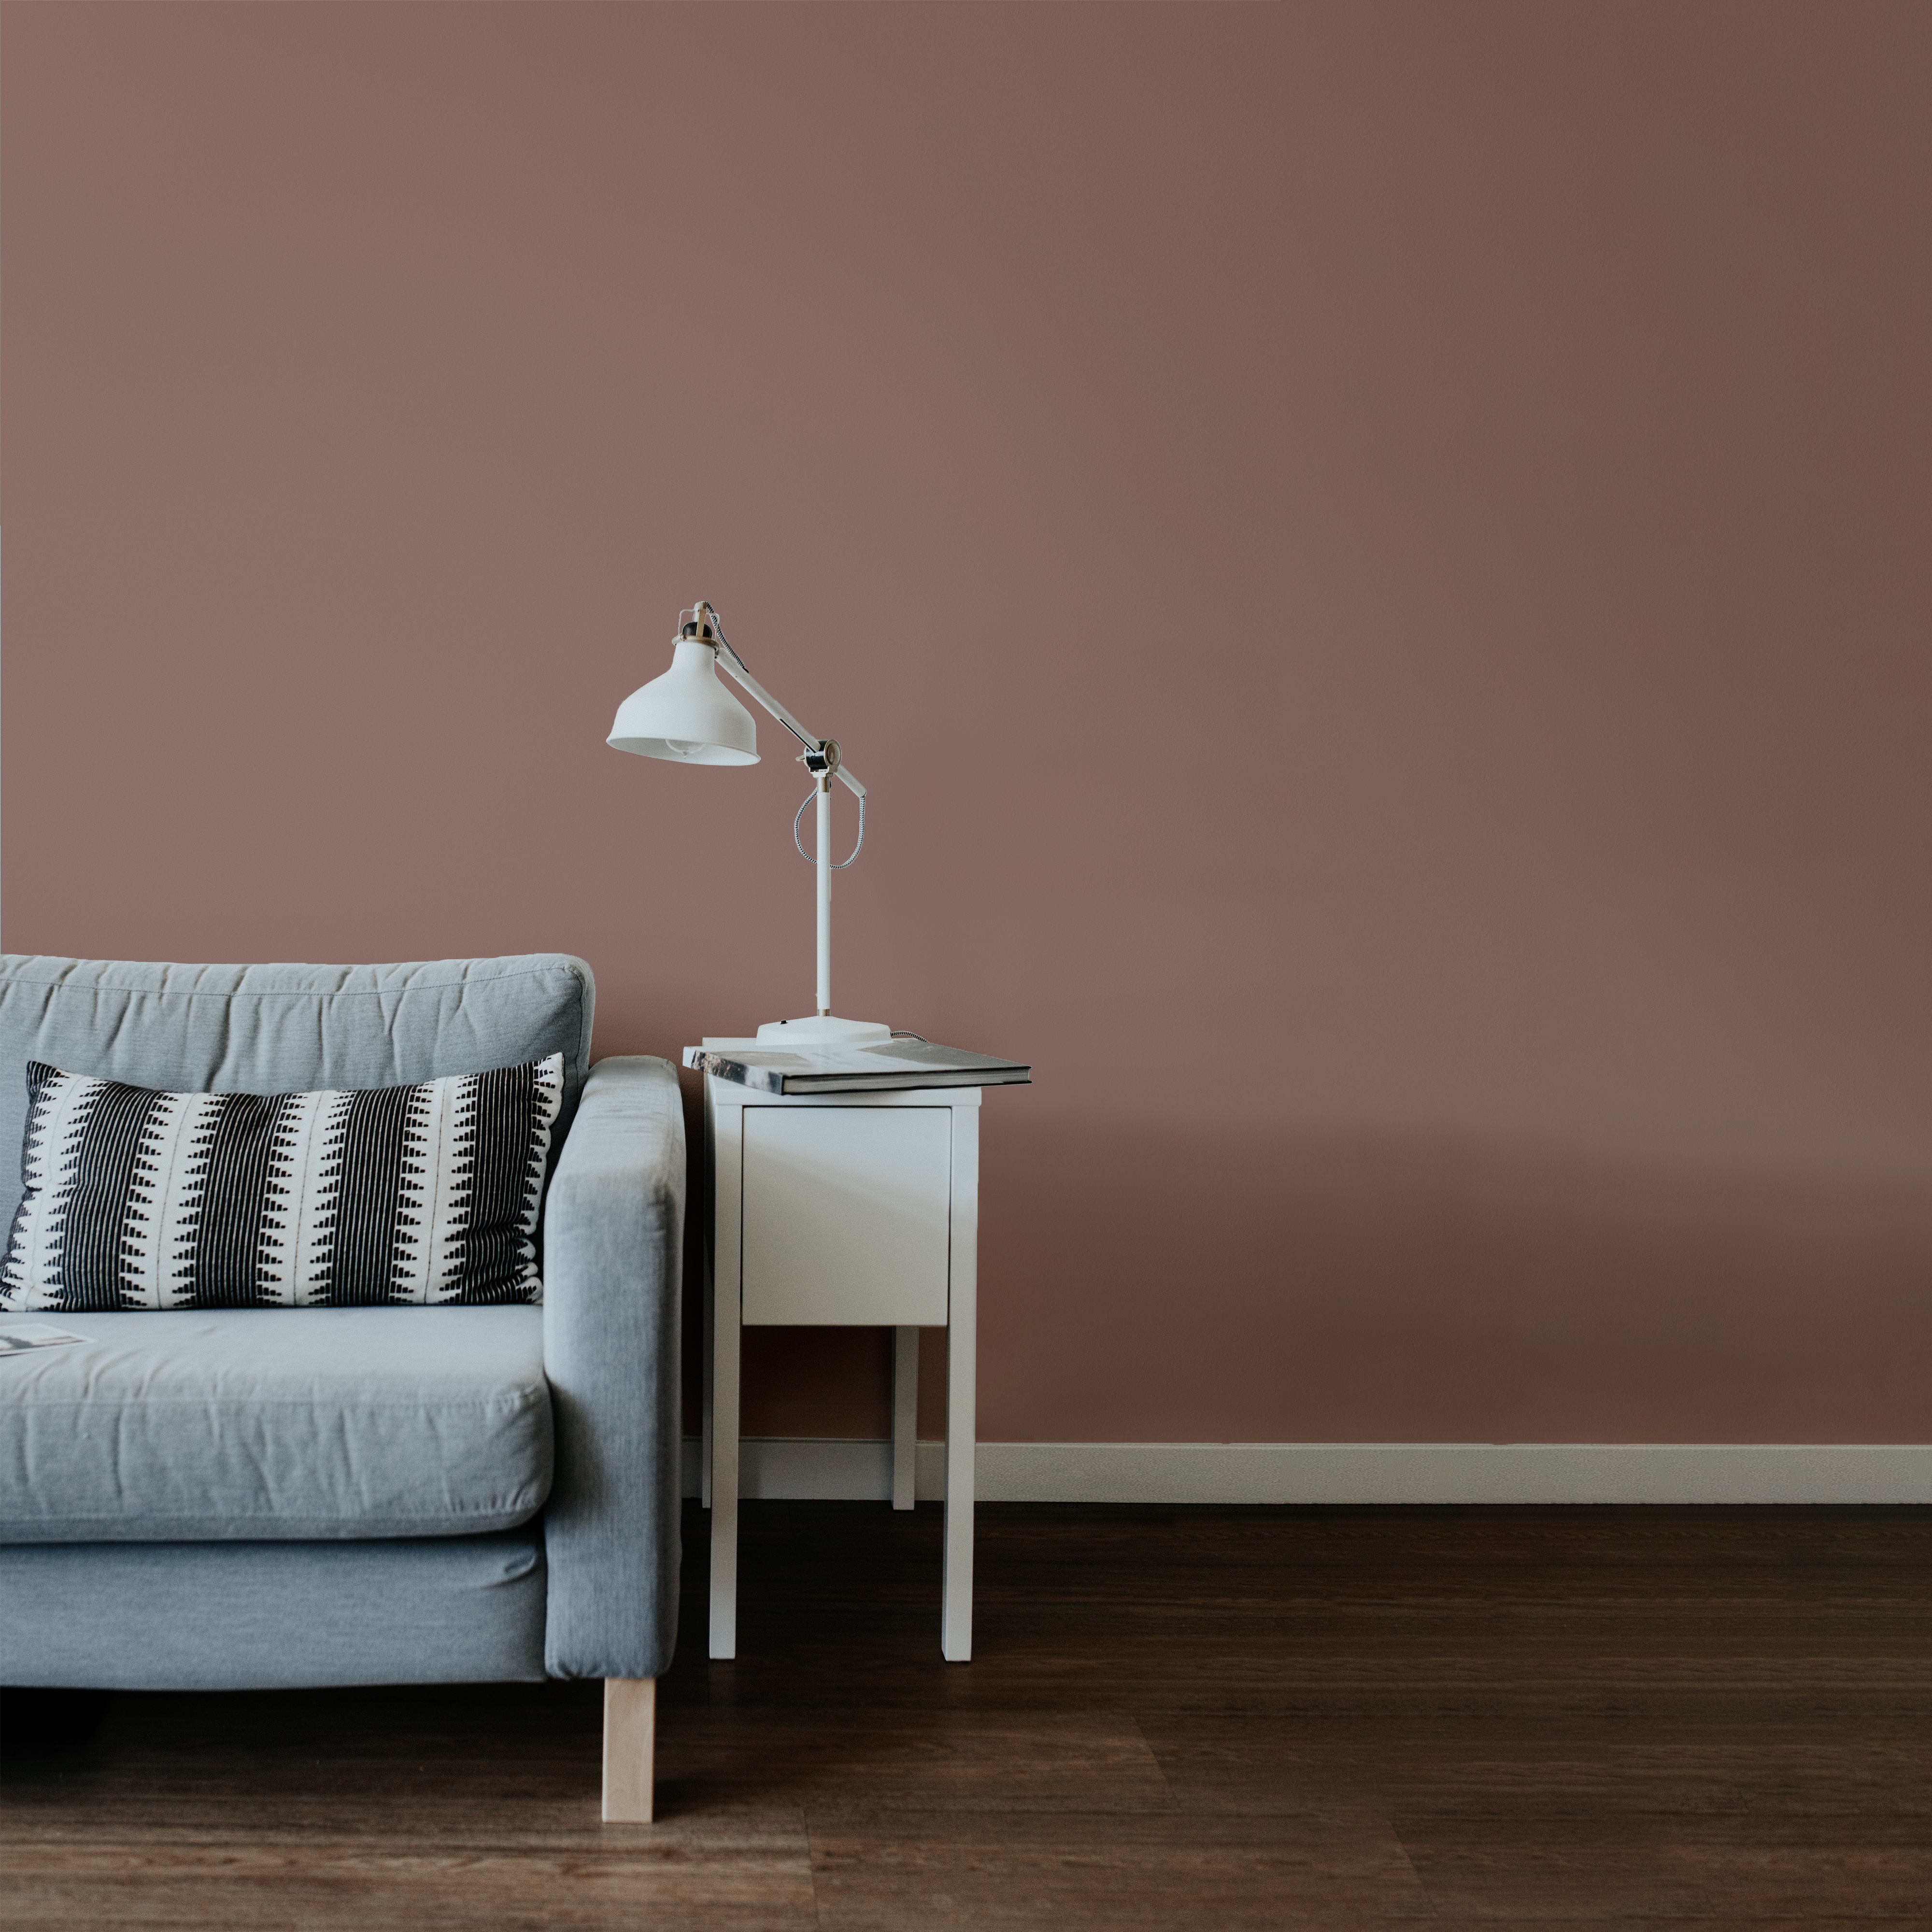 Cotta Red - Wall Paint